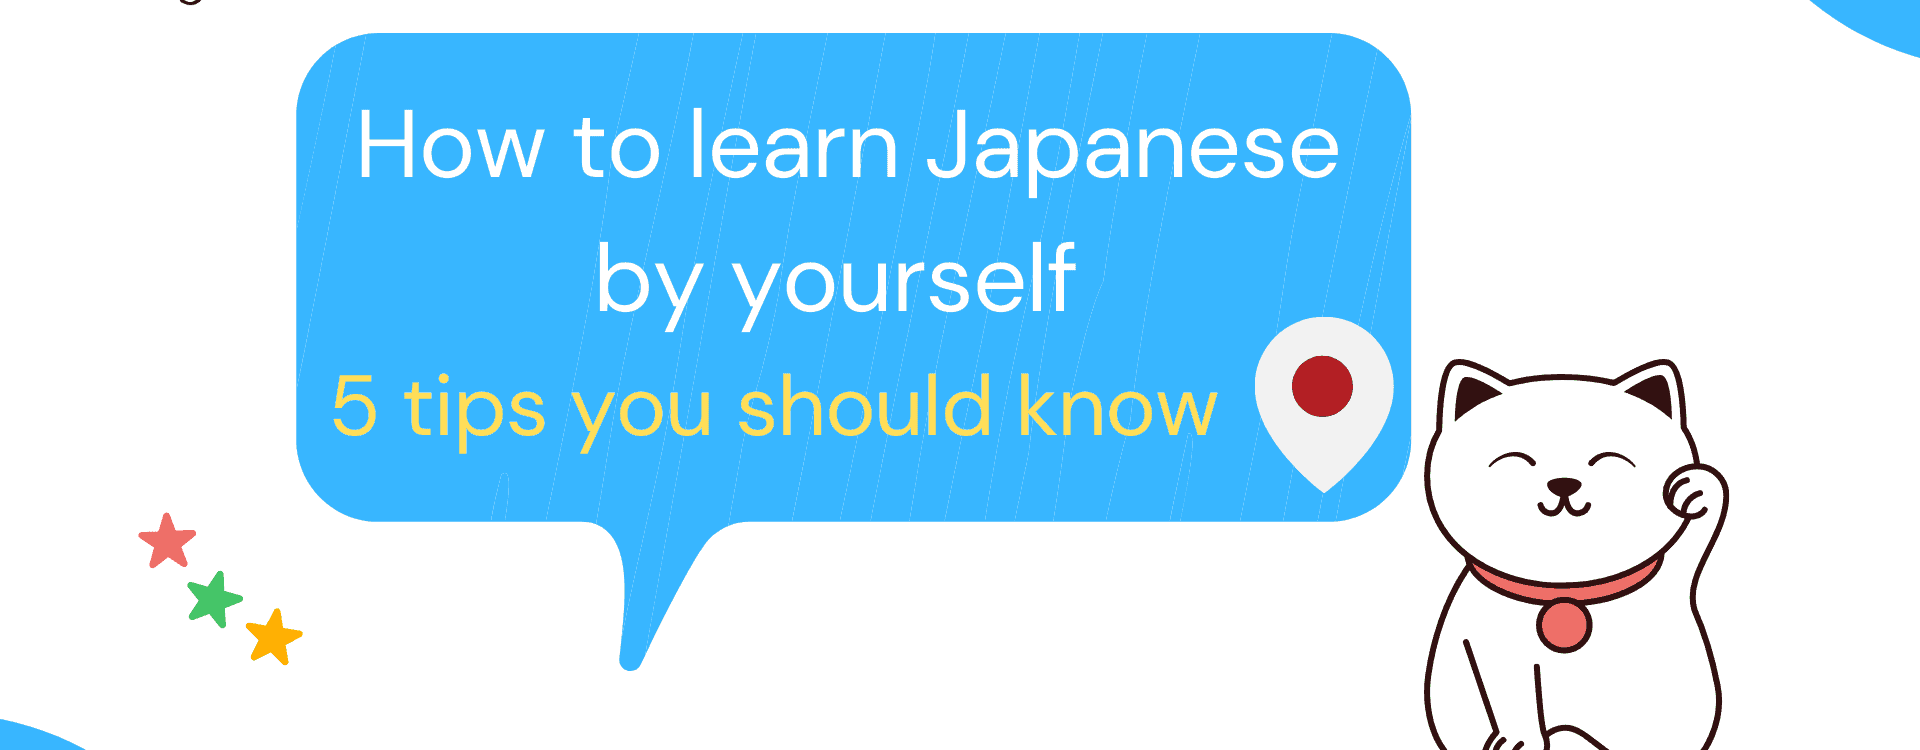 How to learn Japanese by yourself - 5 tips you should know